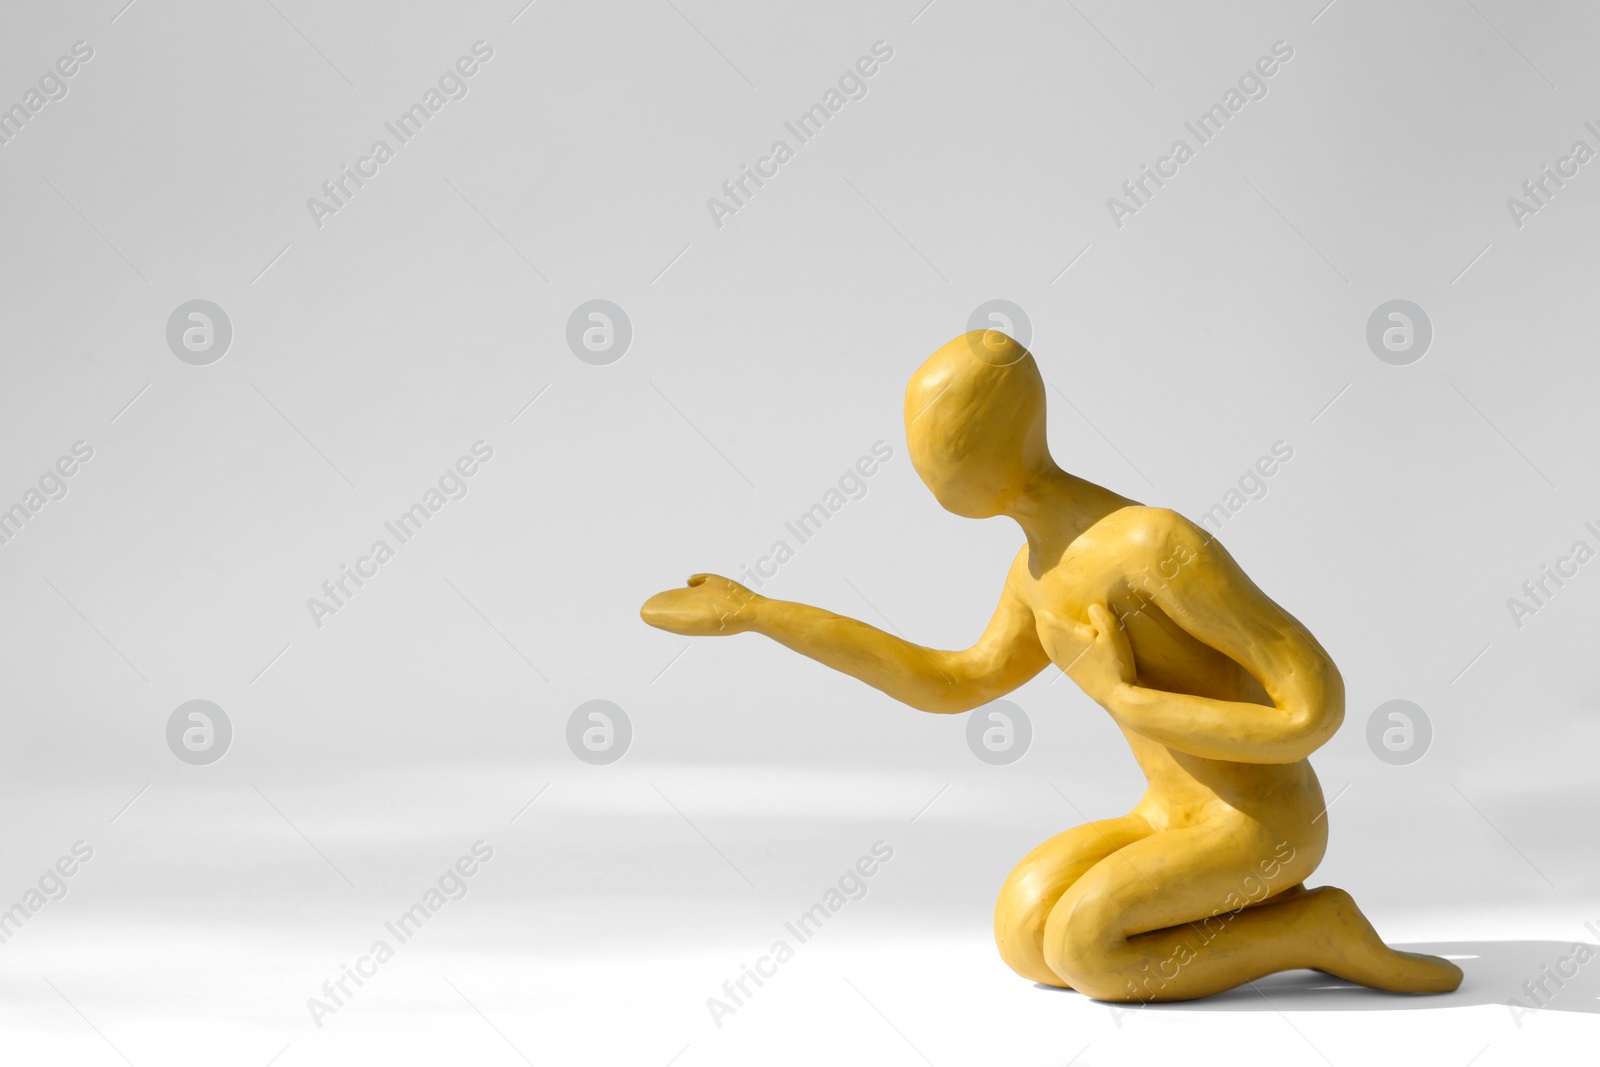 Photo of Plasticine figure of human asking help on white background. Space for text